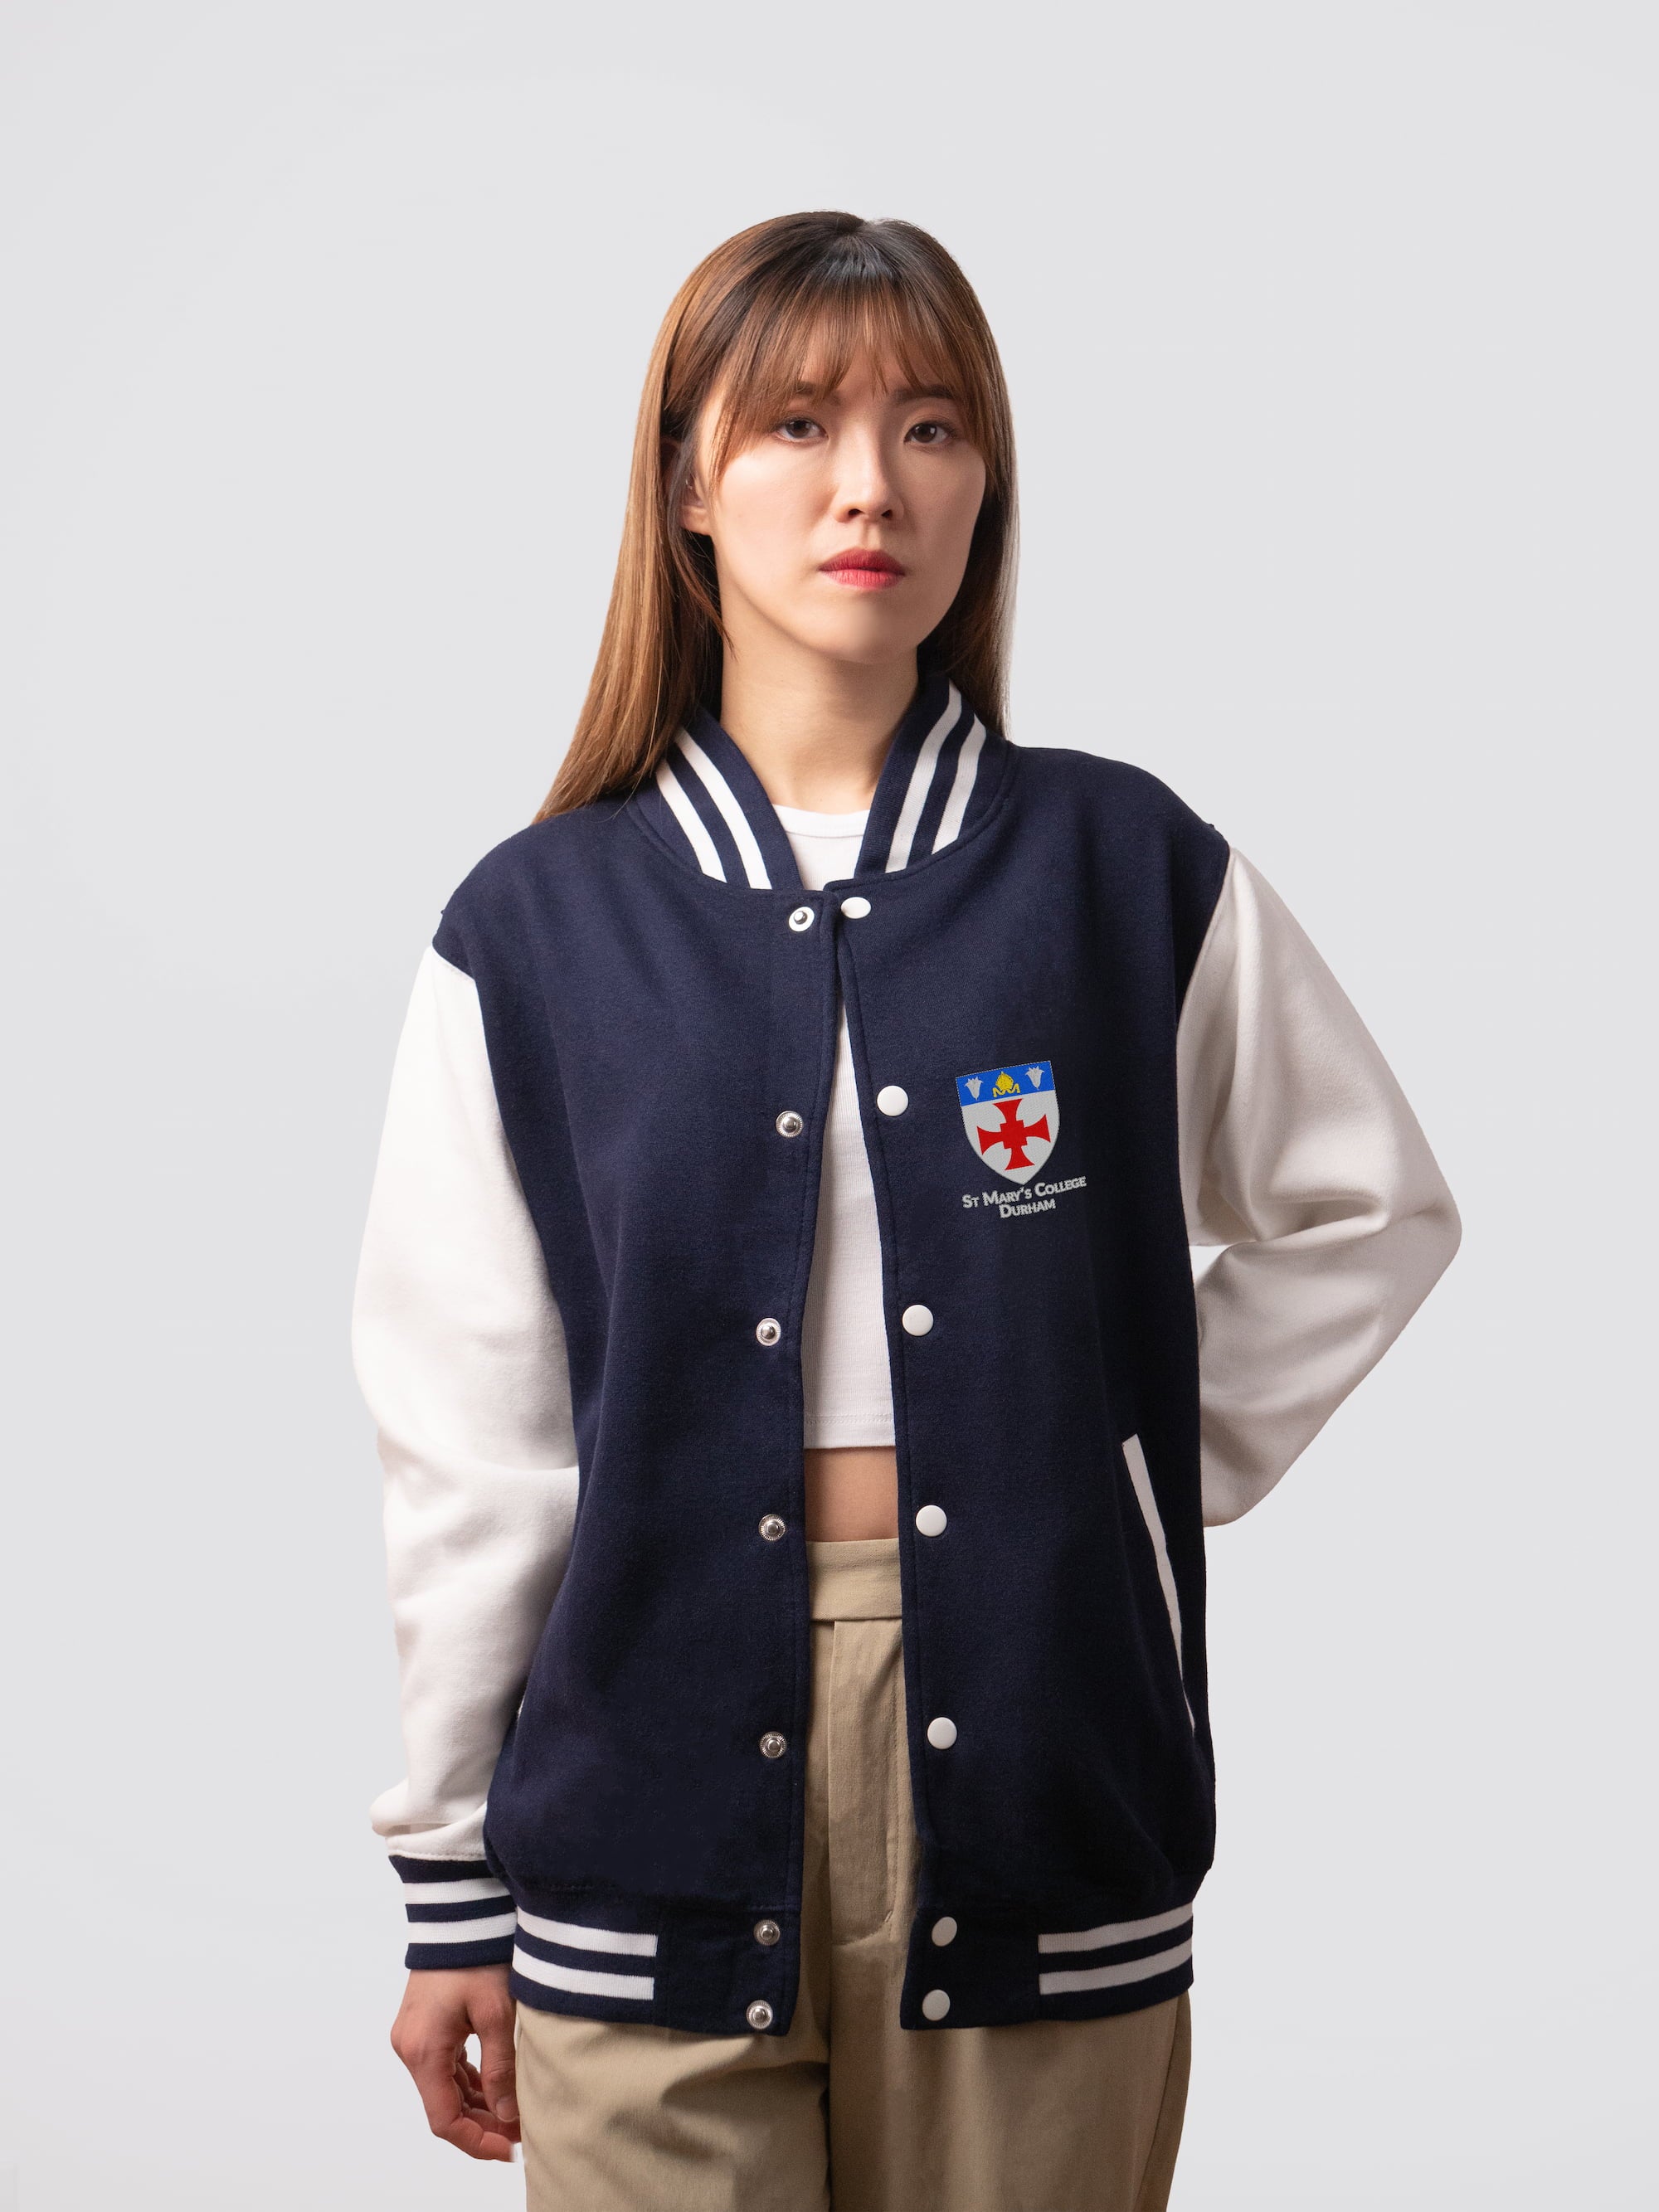 Retro style varsity jacket, with embroidered St Mary's crest